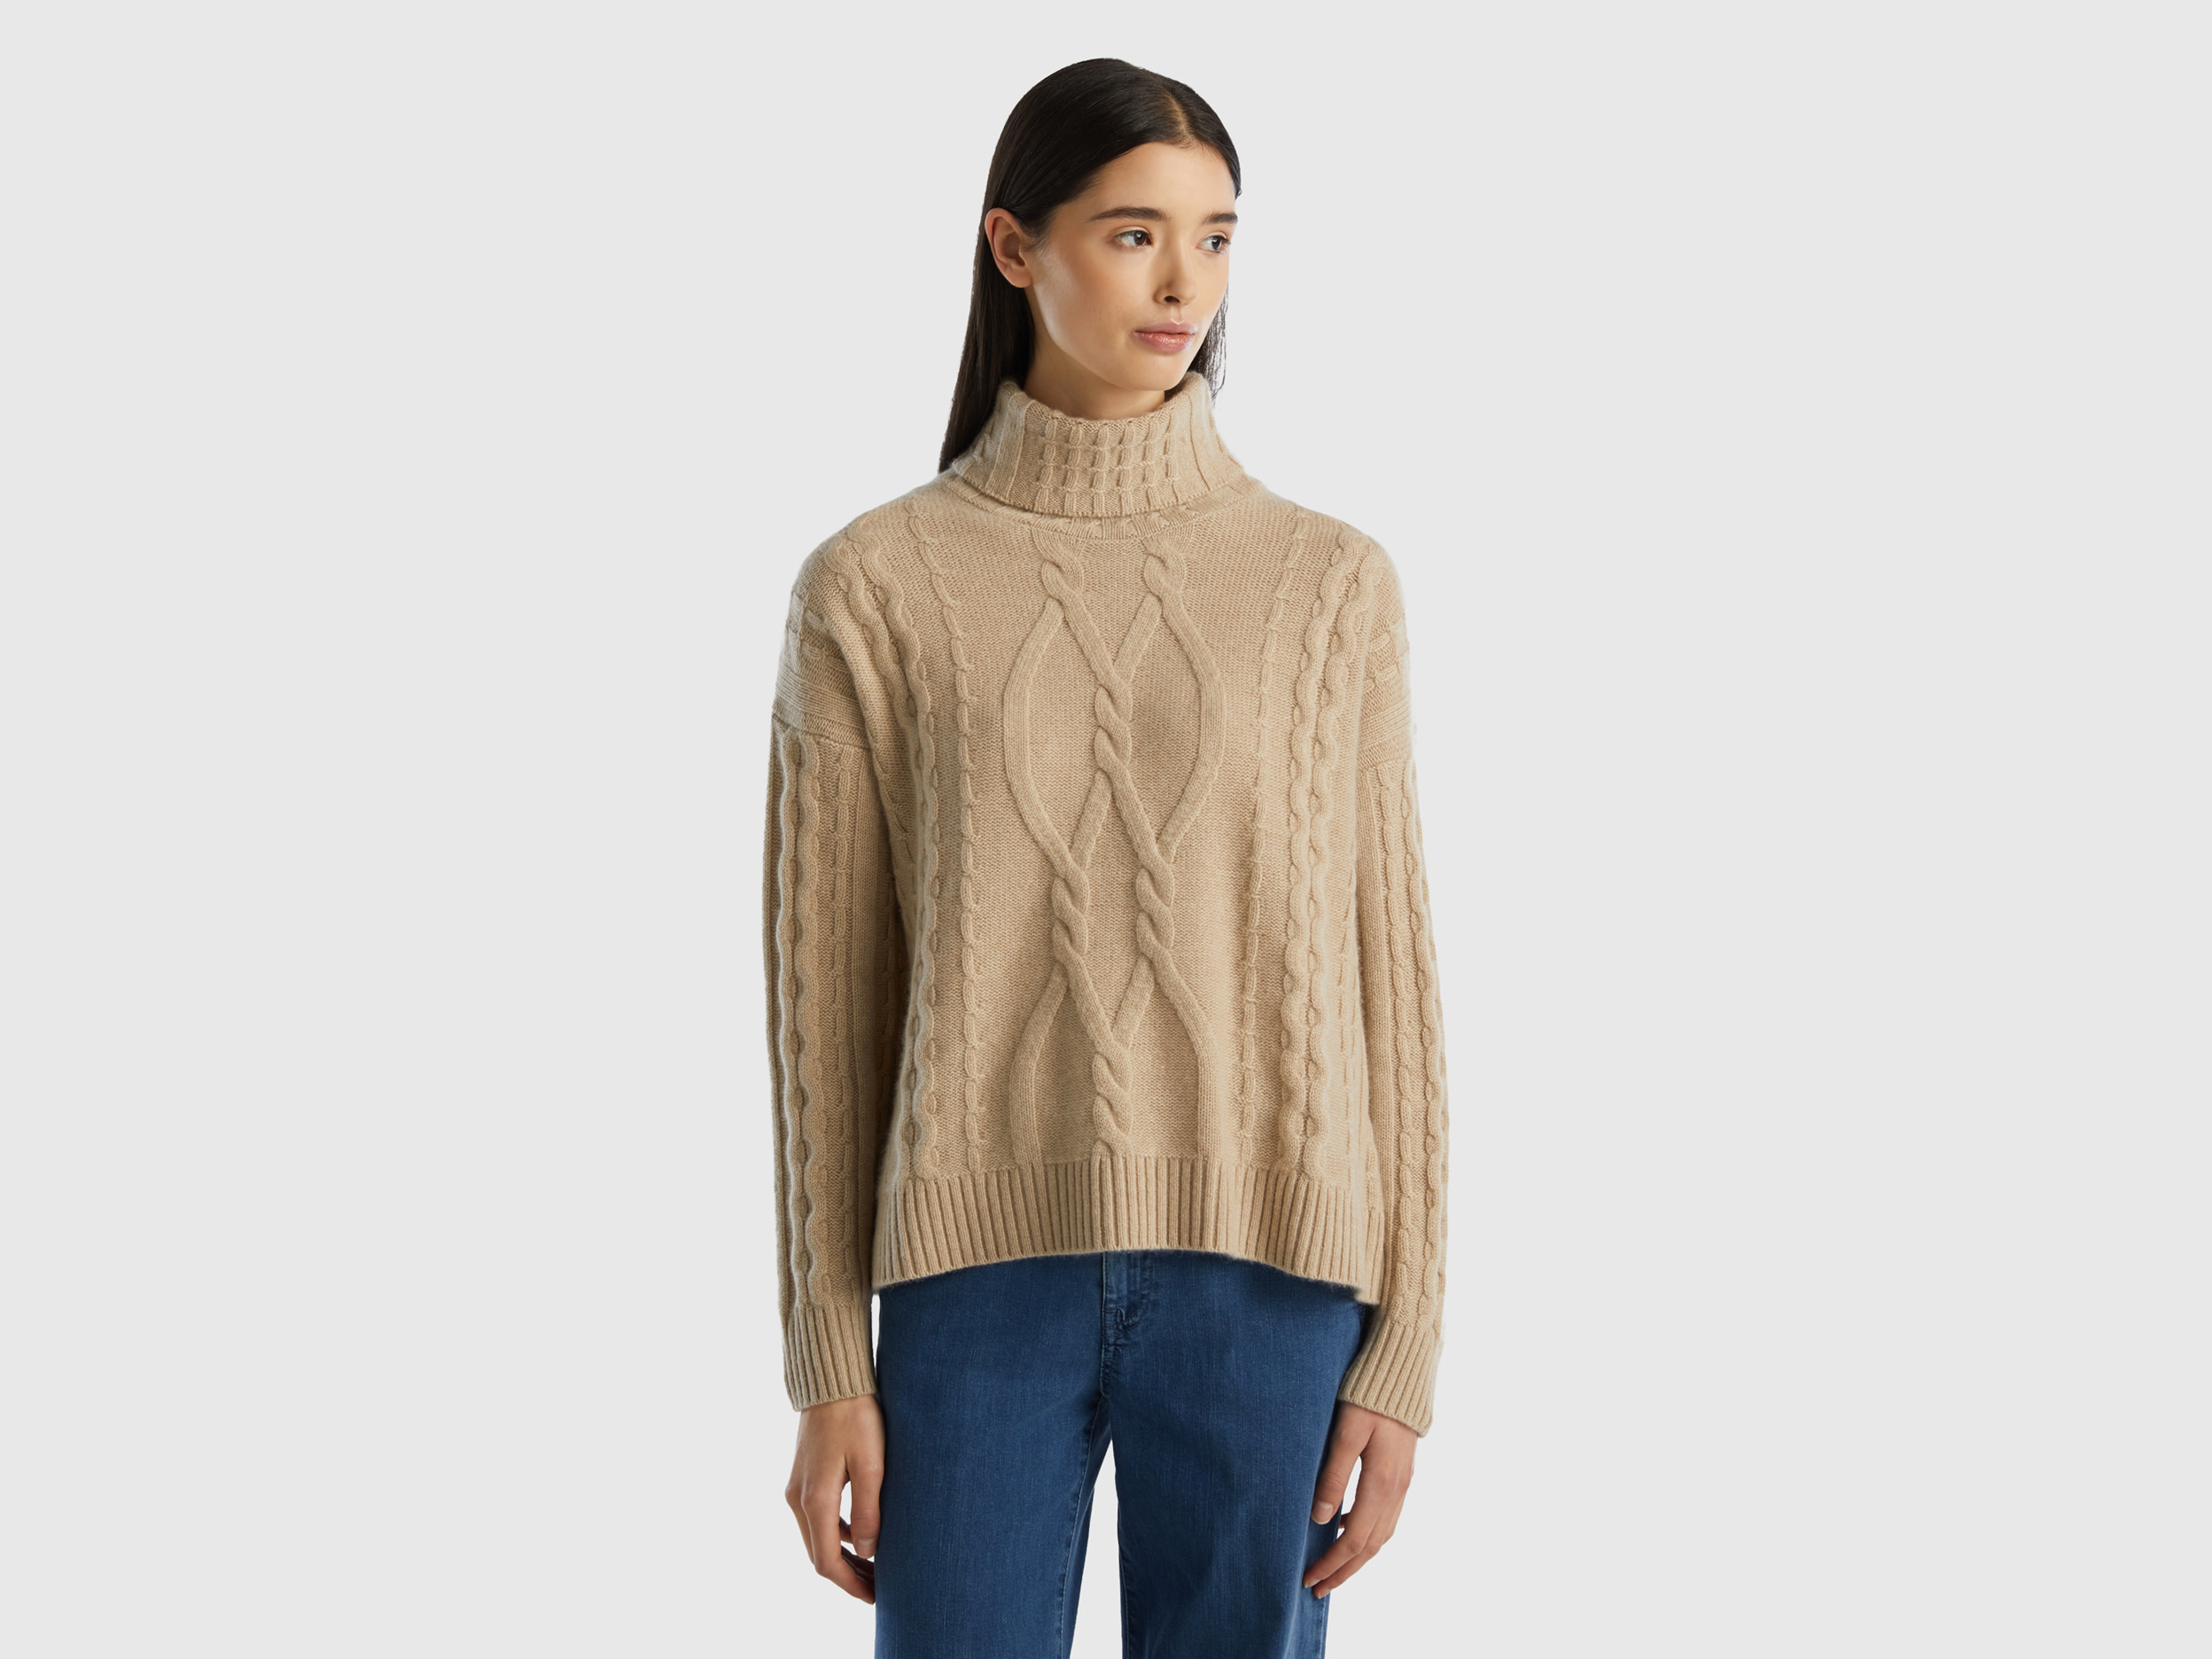 Benetton, Pure Cashmere Turtleneck With Cable Knit, size M, Beige, Women